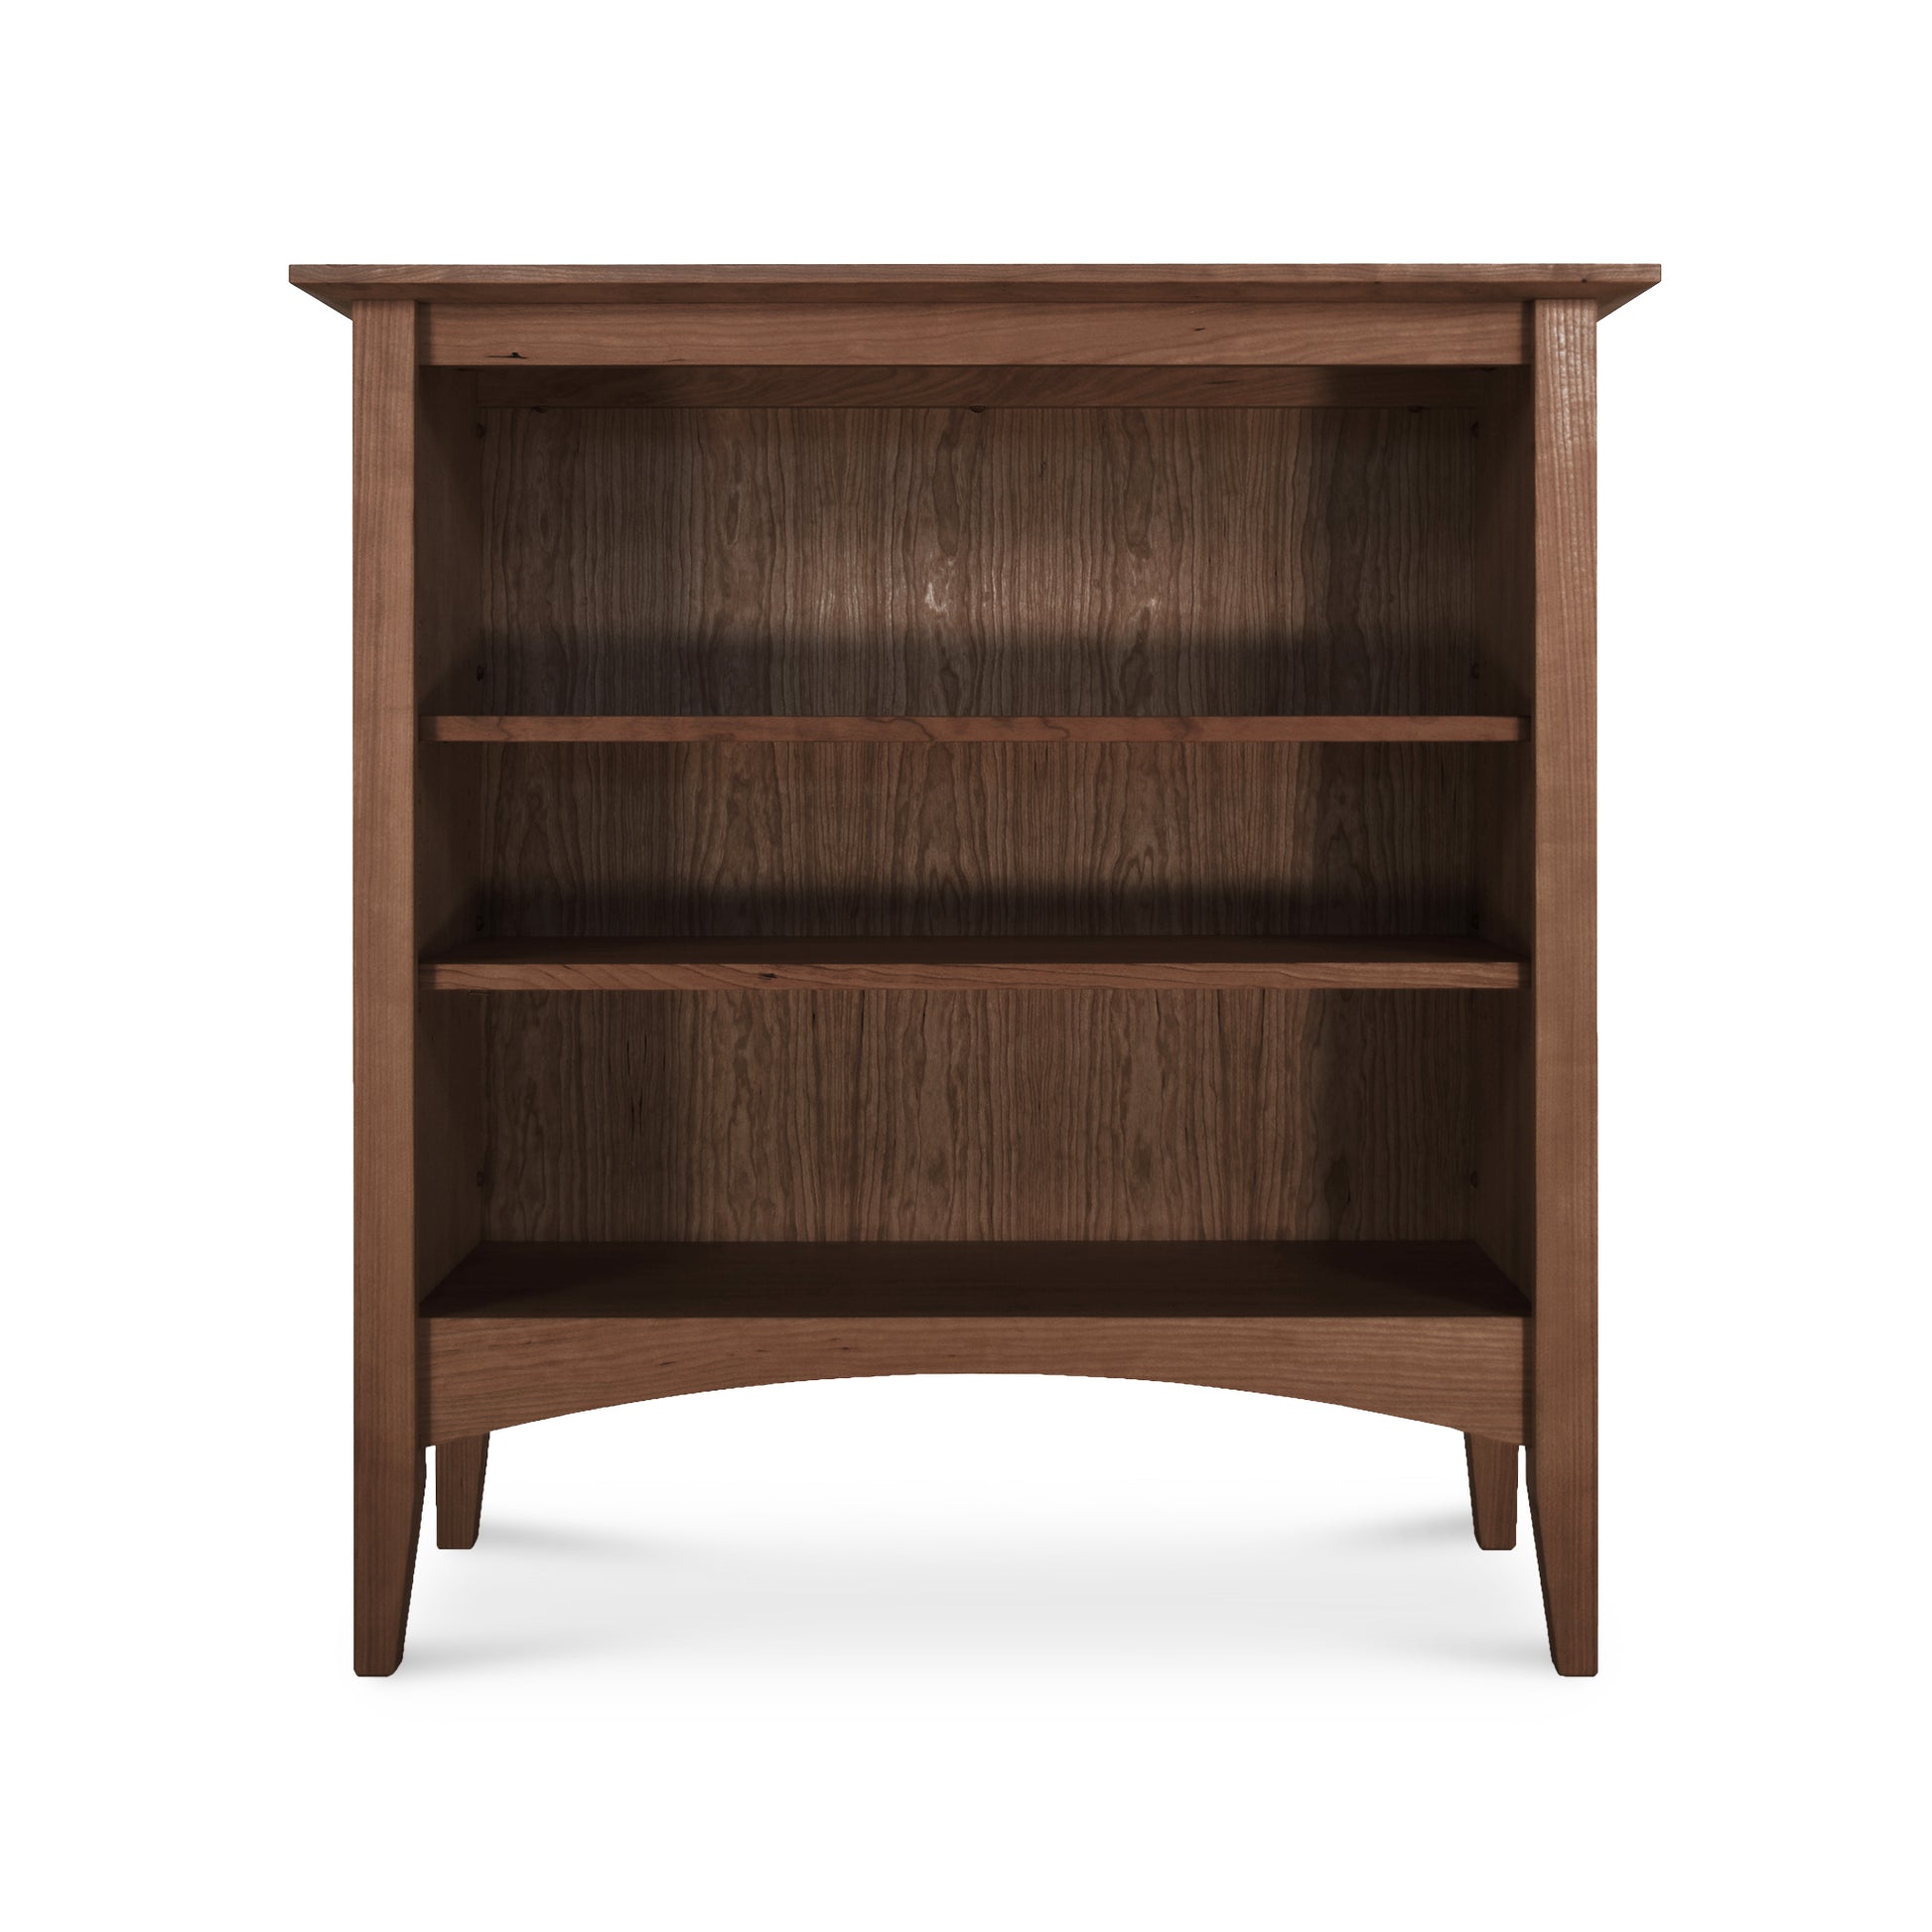 A Maple Corner Woodworks American Shaker bookcase made of sustainably harvested hardwoods, showcased on a white background.